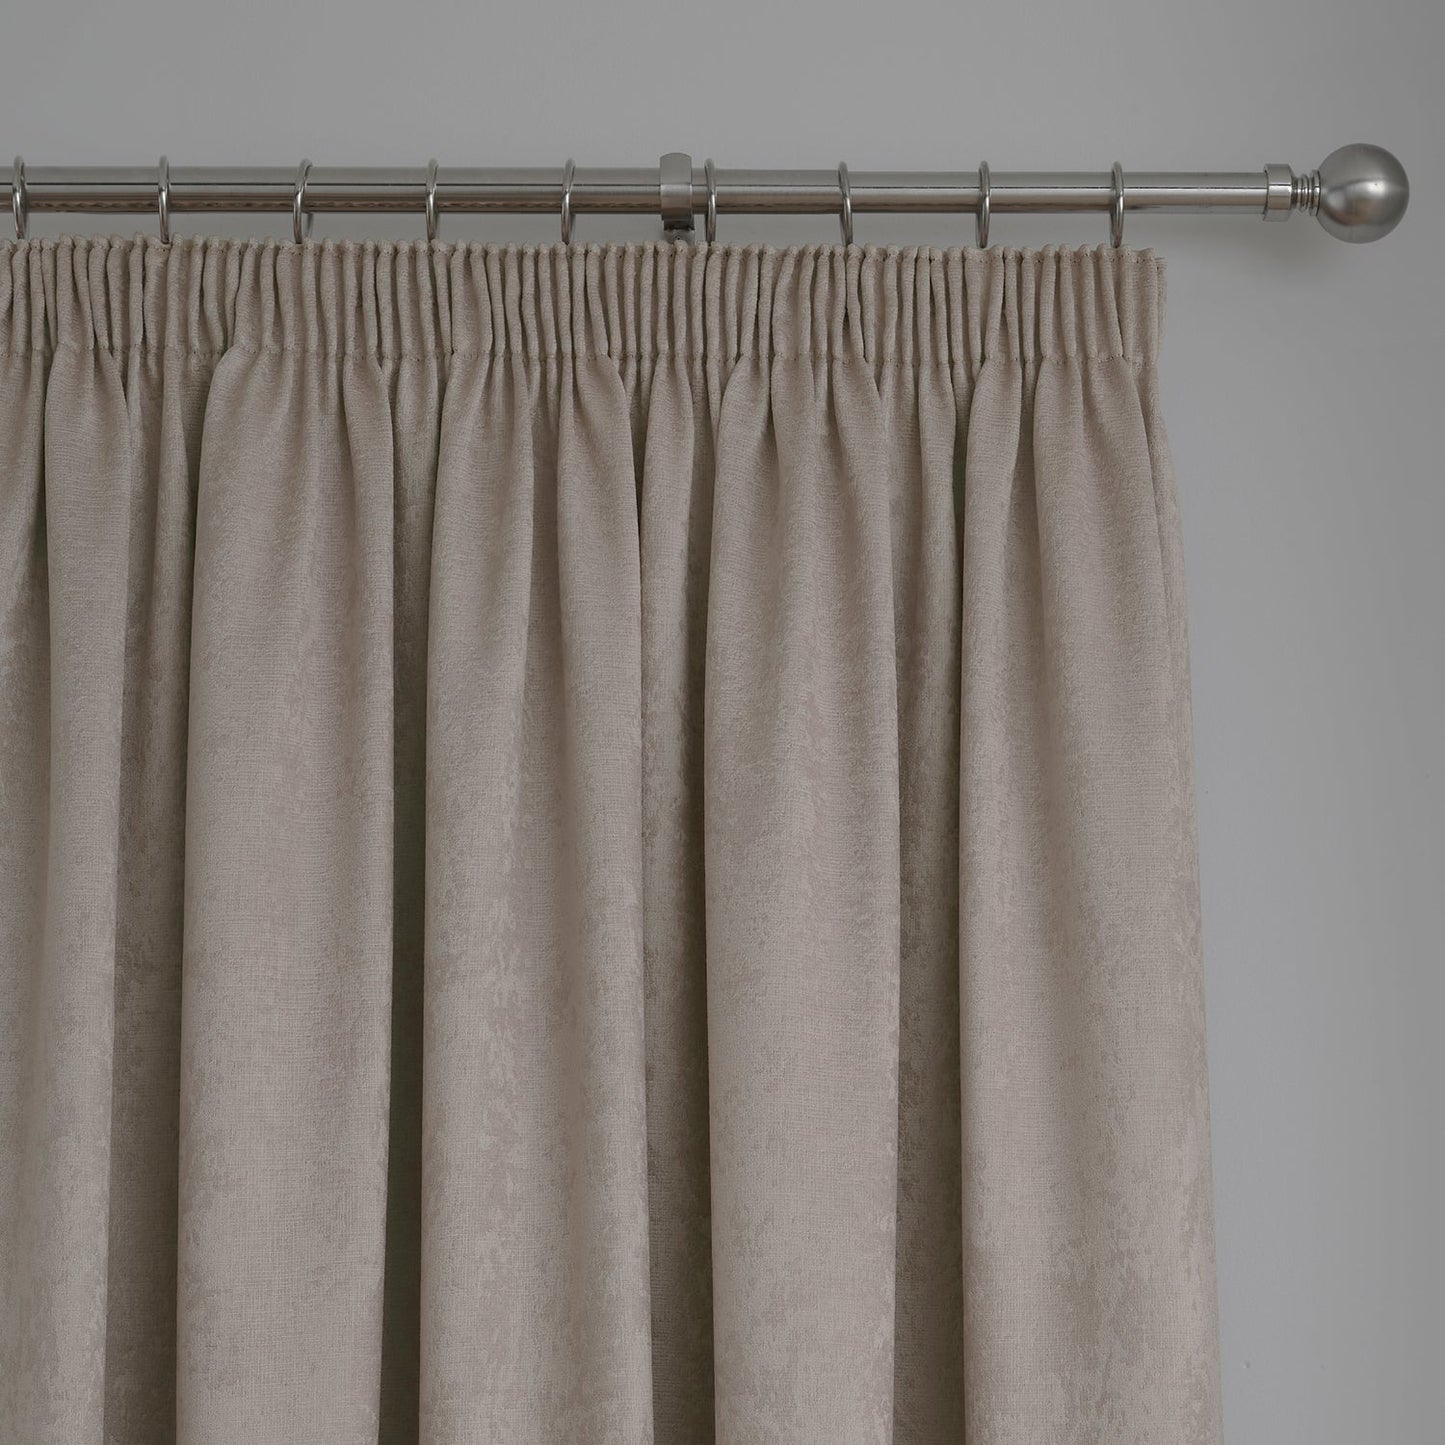 Galaxy Natural Dim Out Pencil Pleat Curtains